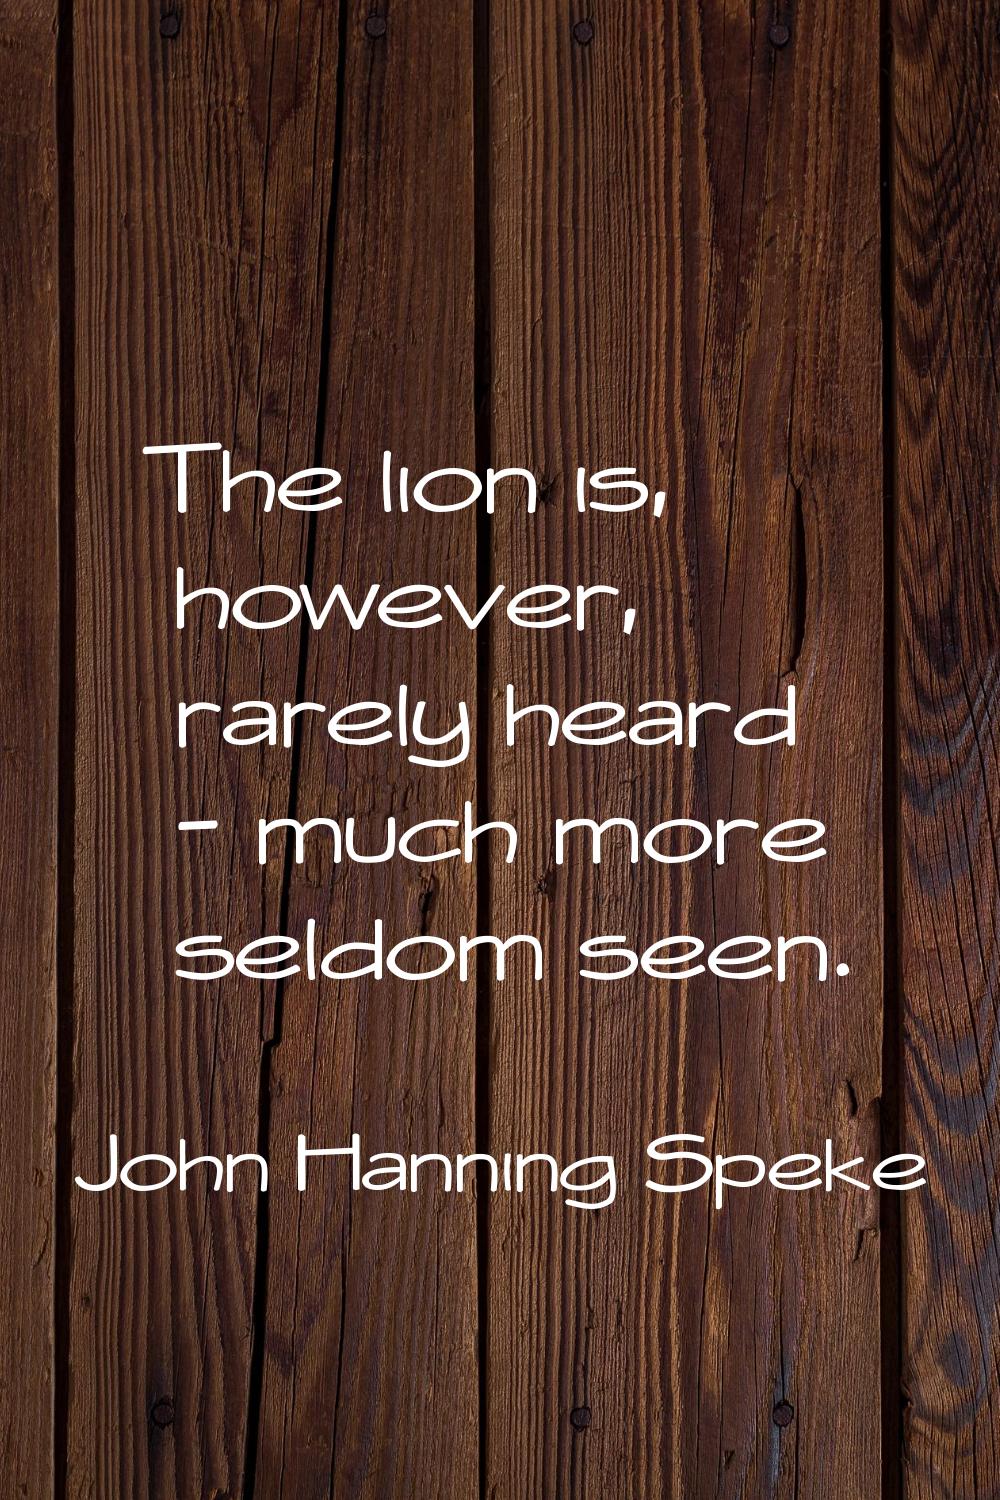 The lion is, however, rarely heard - much more seldom seen.